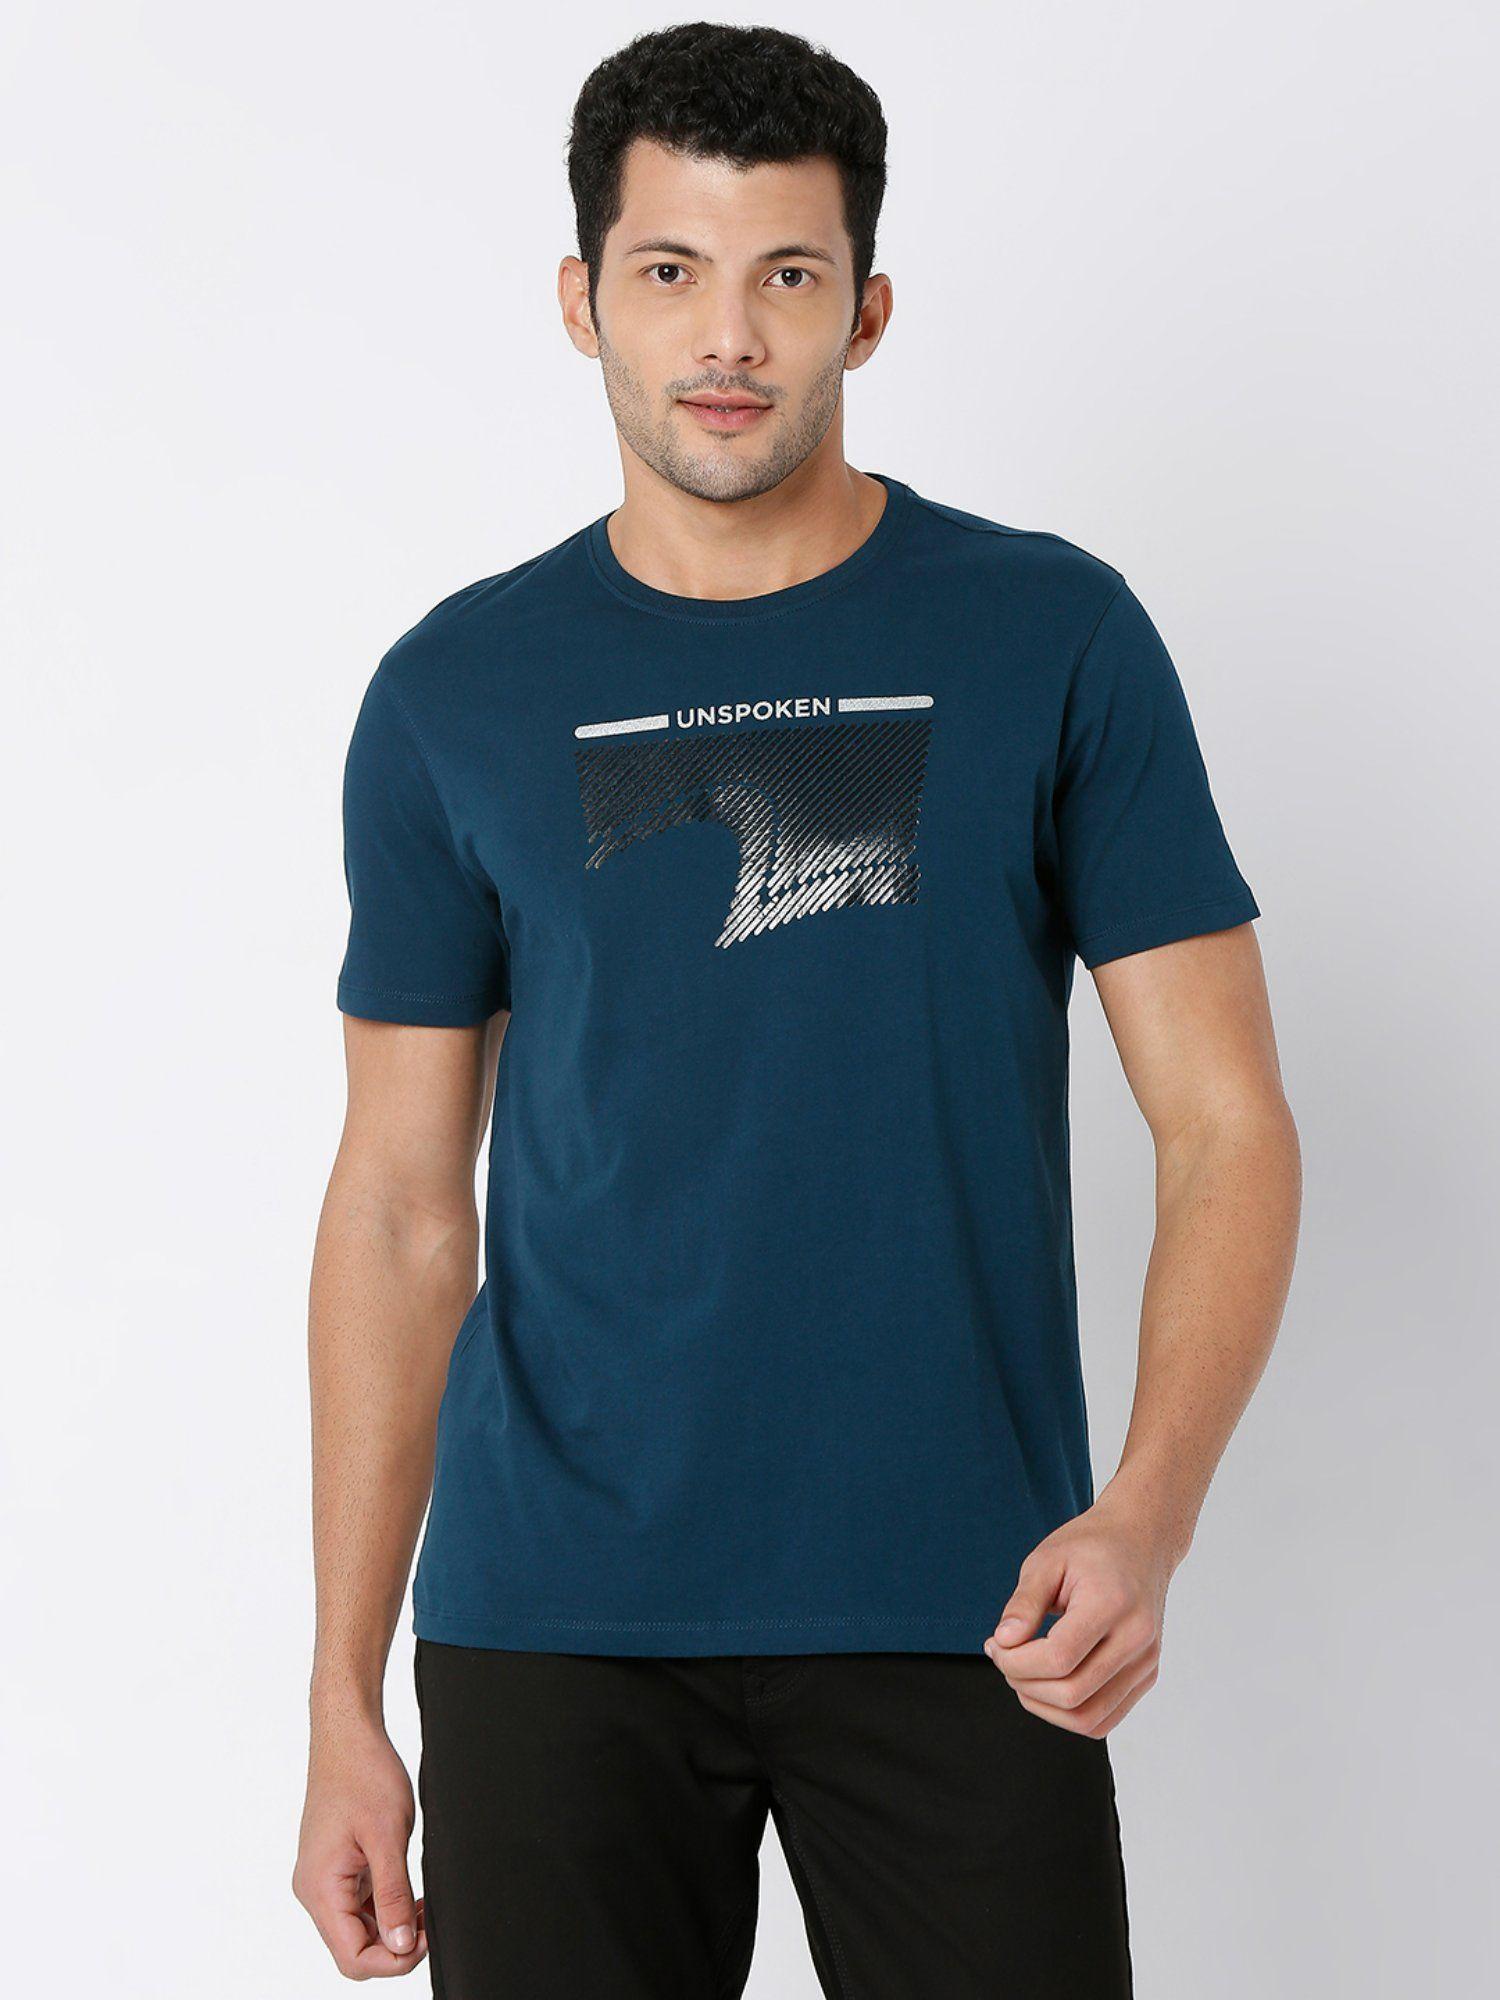 teal blue cotton half sleeve printed casual t-shirt for men